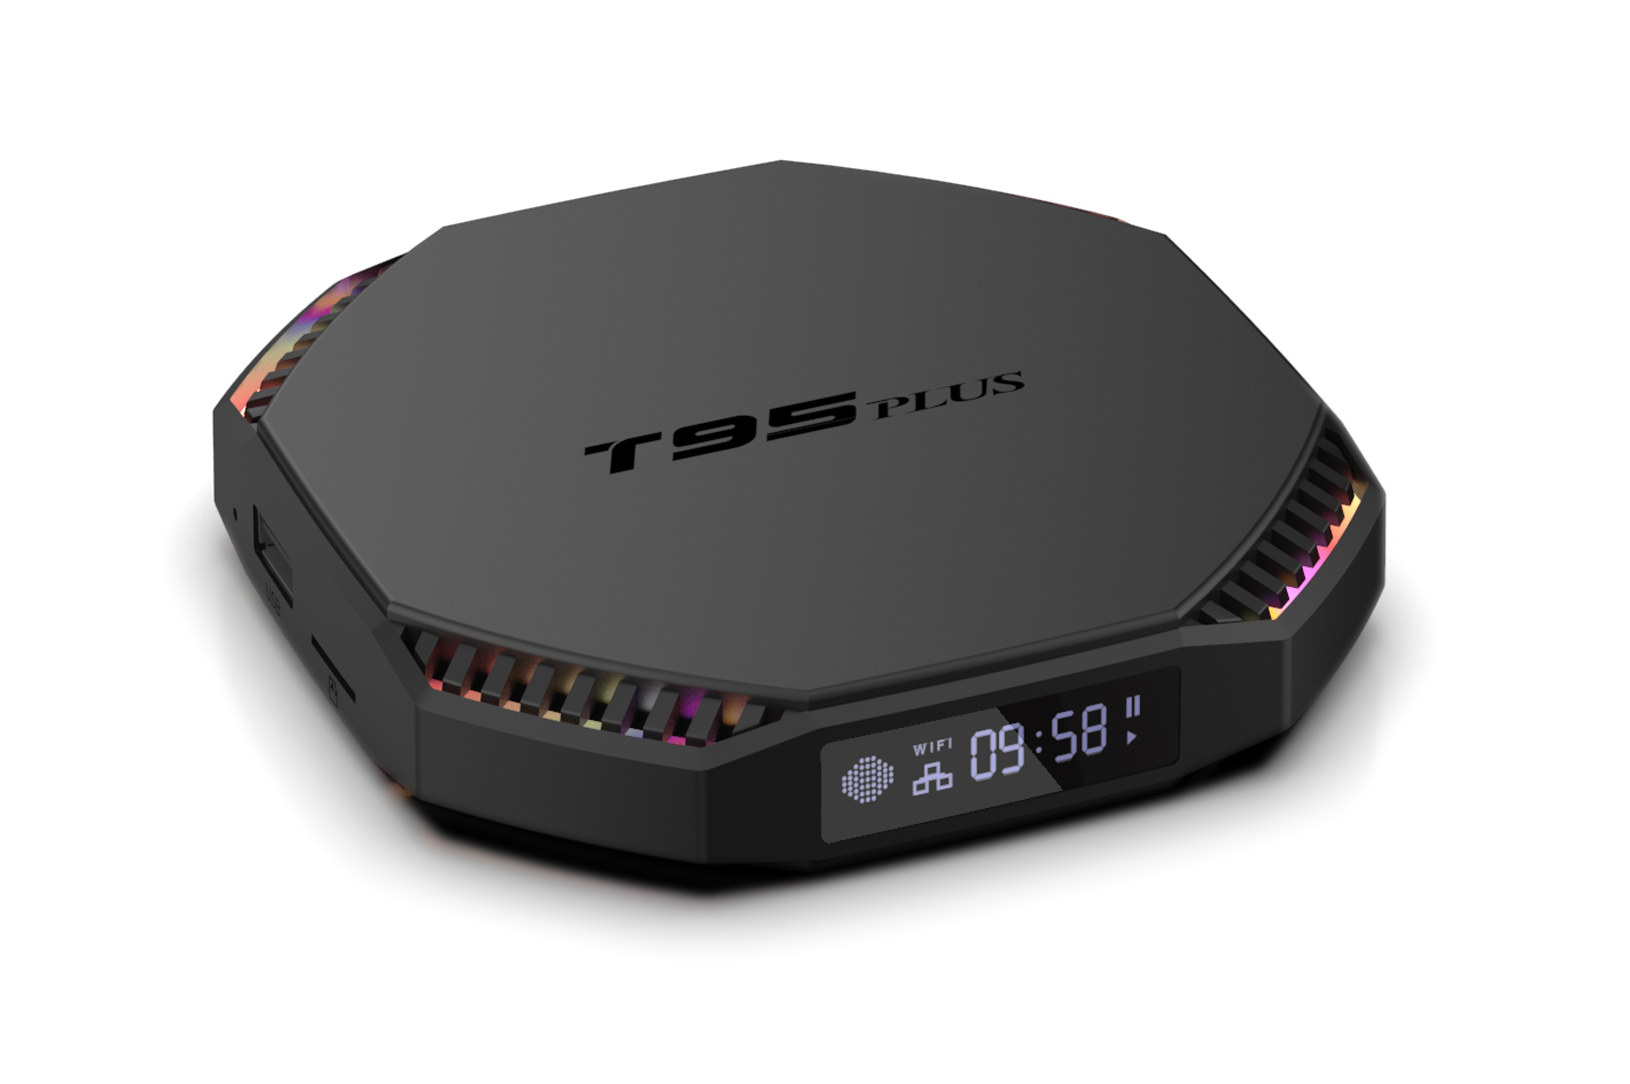 T95 Plus Android 11 TV Box features Rockchip RK3566 AIoT processor, 8GB RAM  - CNX Software